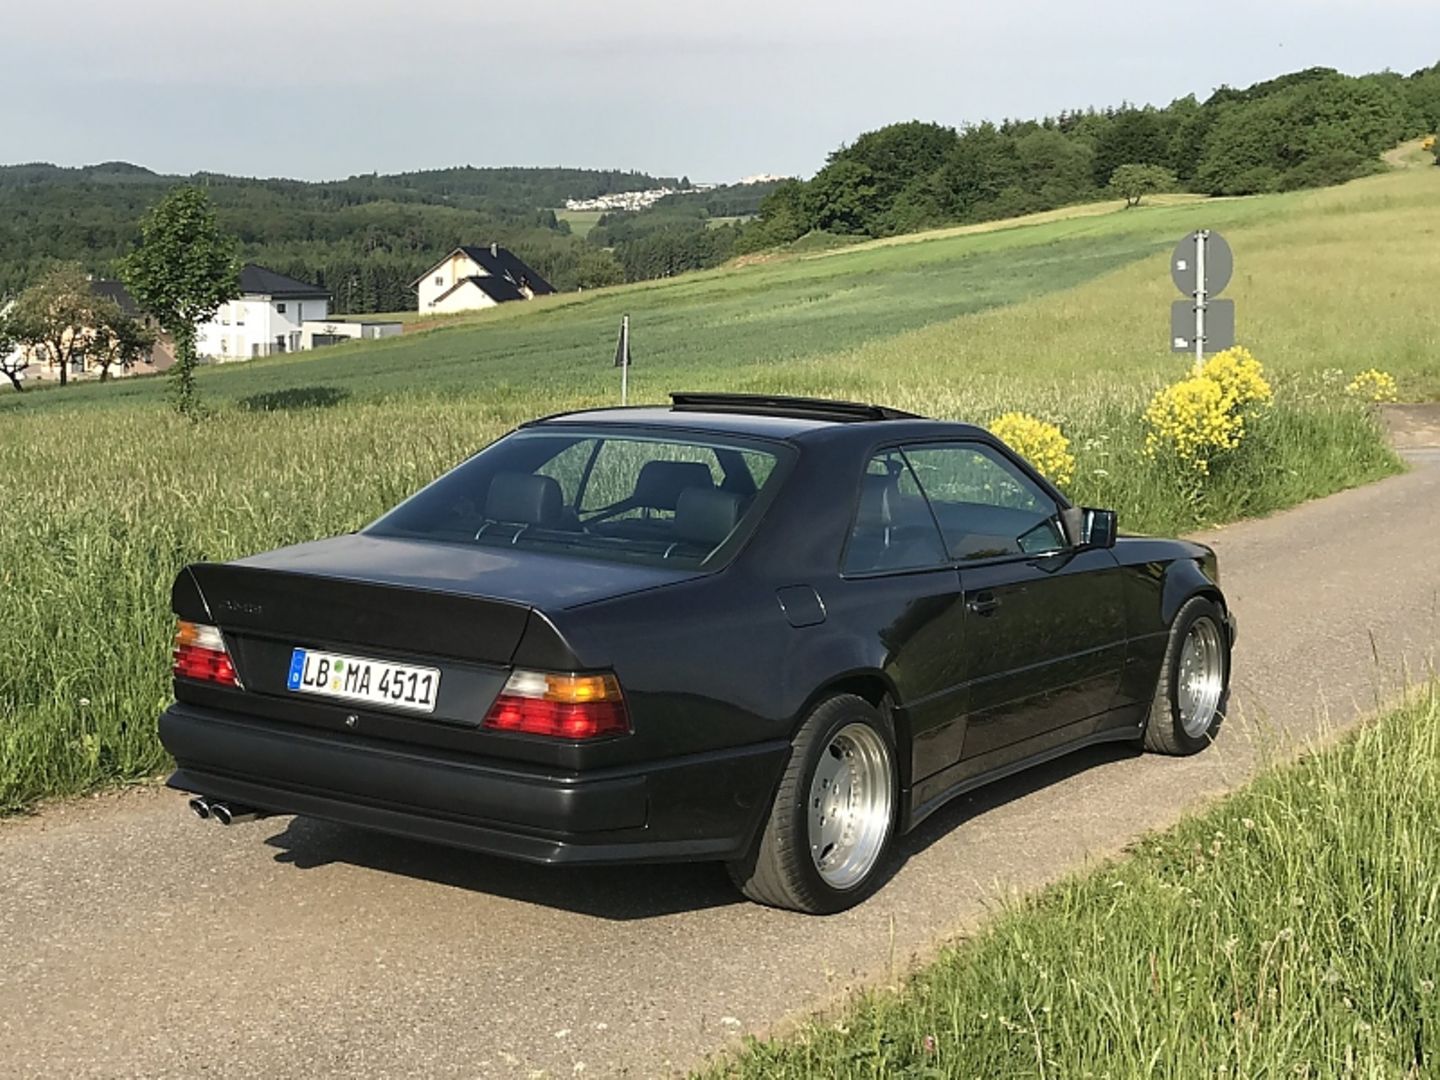 Mercedes 300 CE 6.0 AMG - 385 PS, 289 km/h Spitze